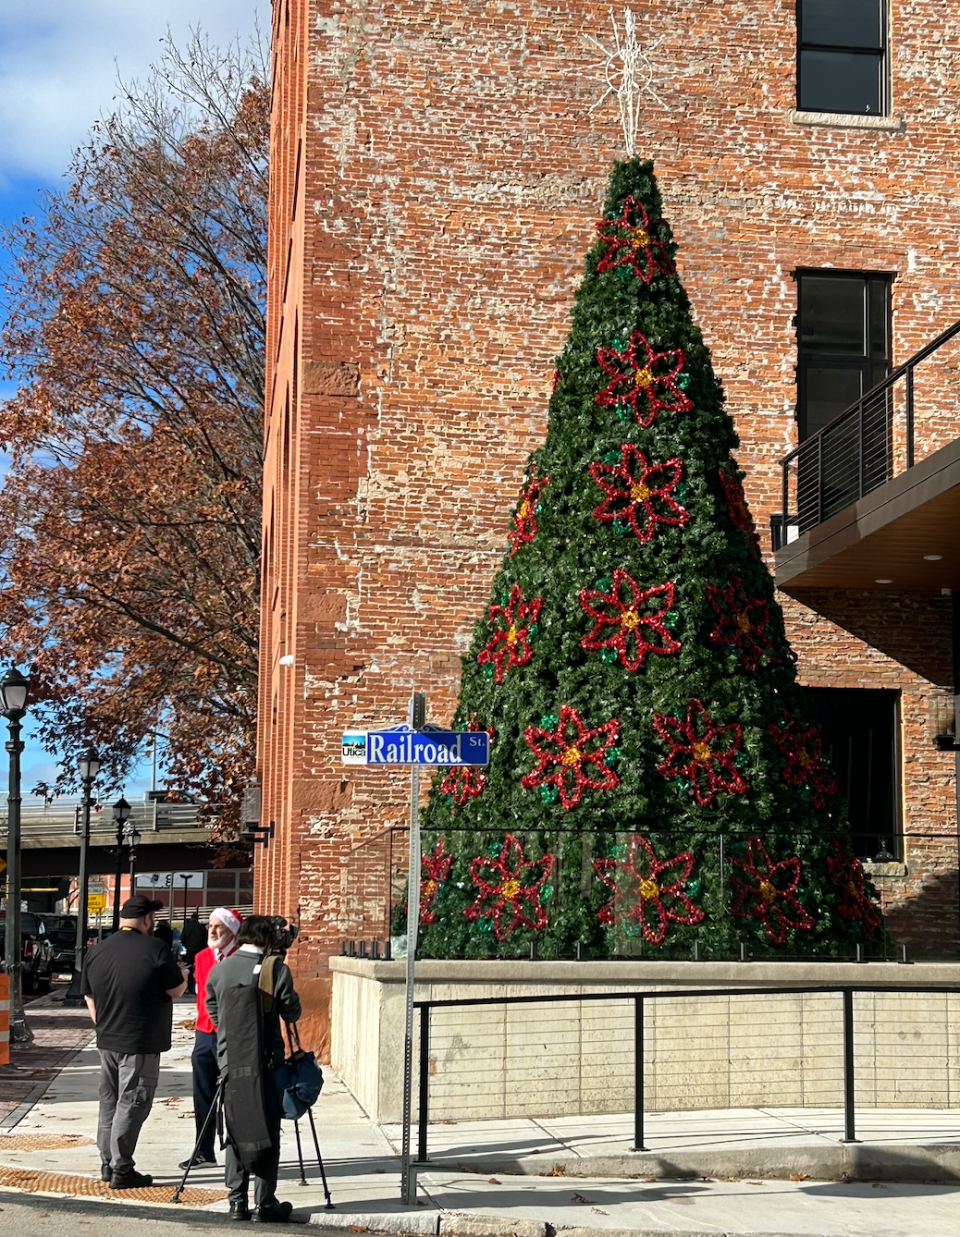 The annual Christmas tree goes up on the corner of Main and RailRoad St. in Utica.